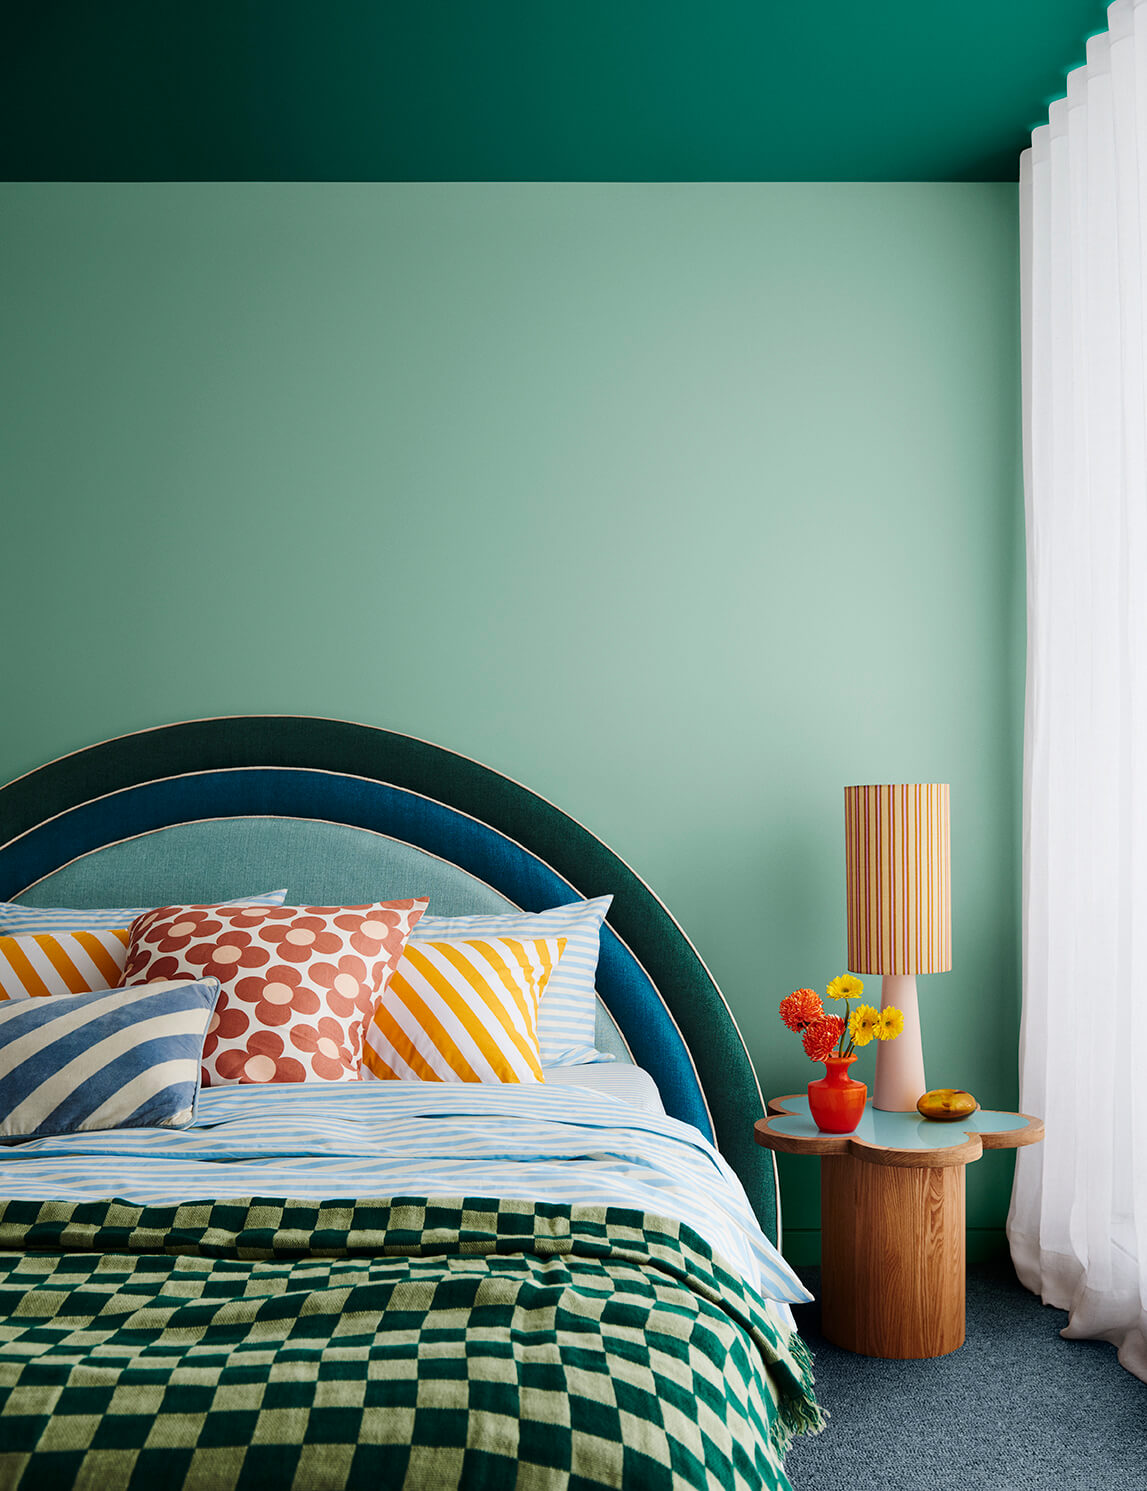 dulux revive color palette green bedroom nordroom The Color Trends for 2023: Rich & Warm Natural Hues